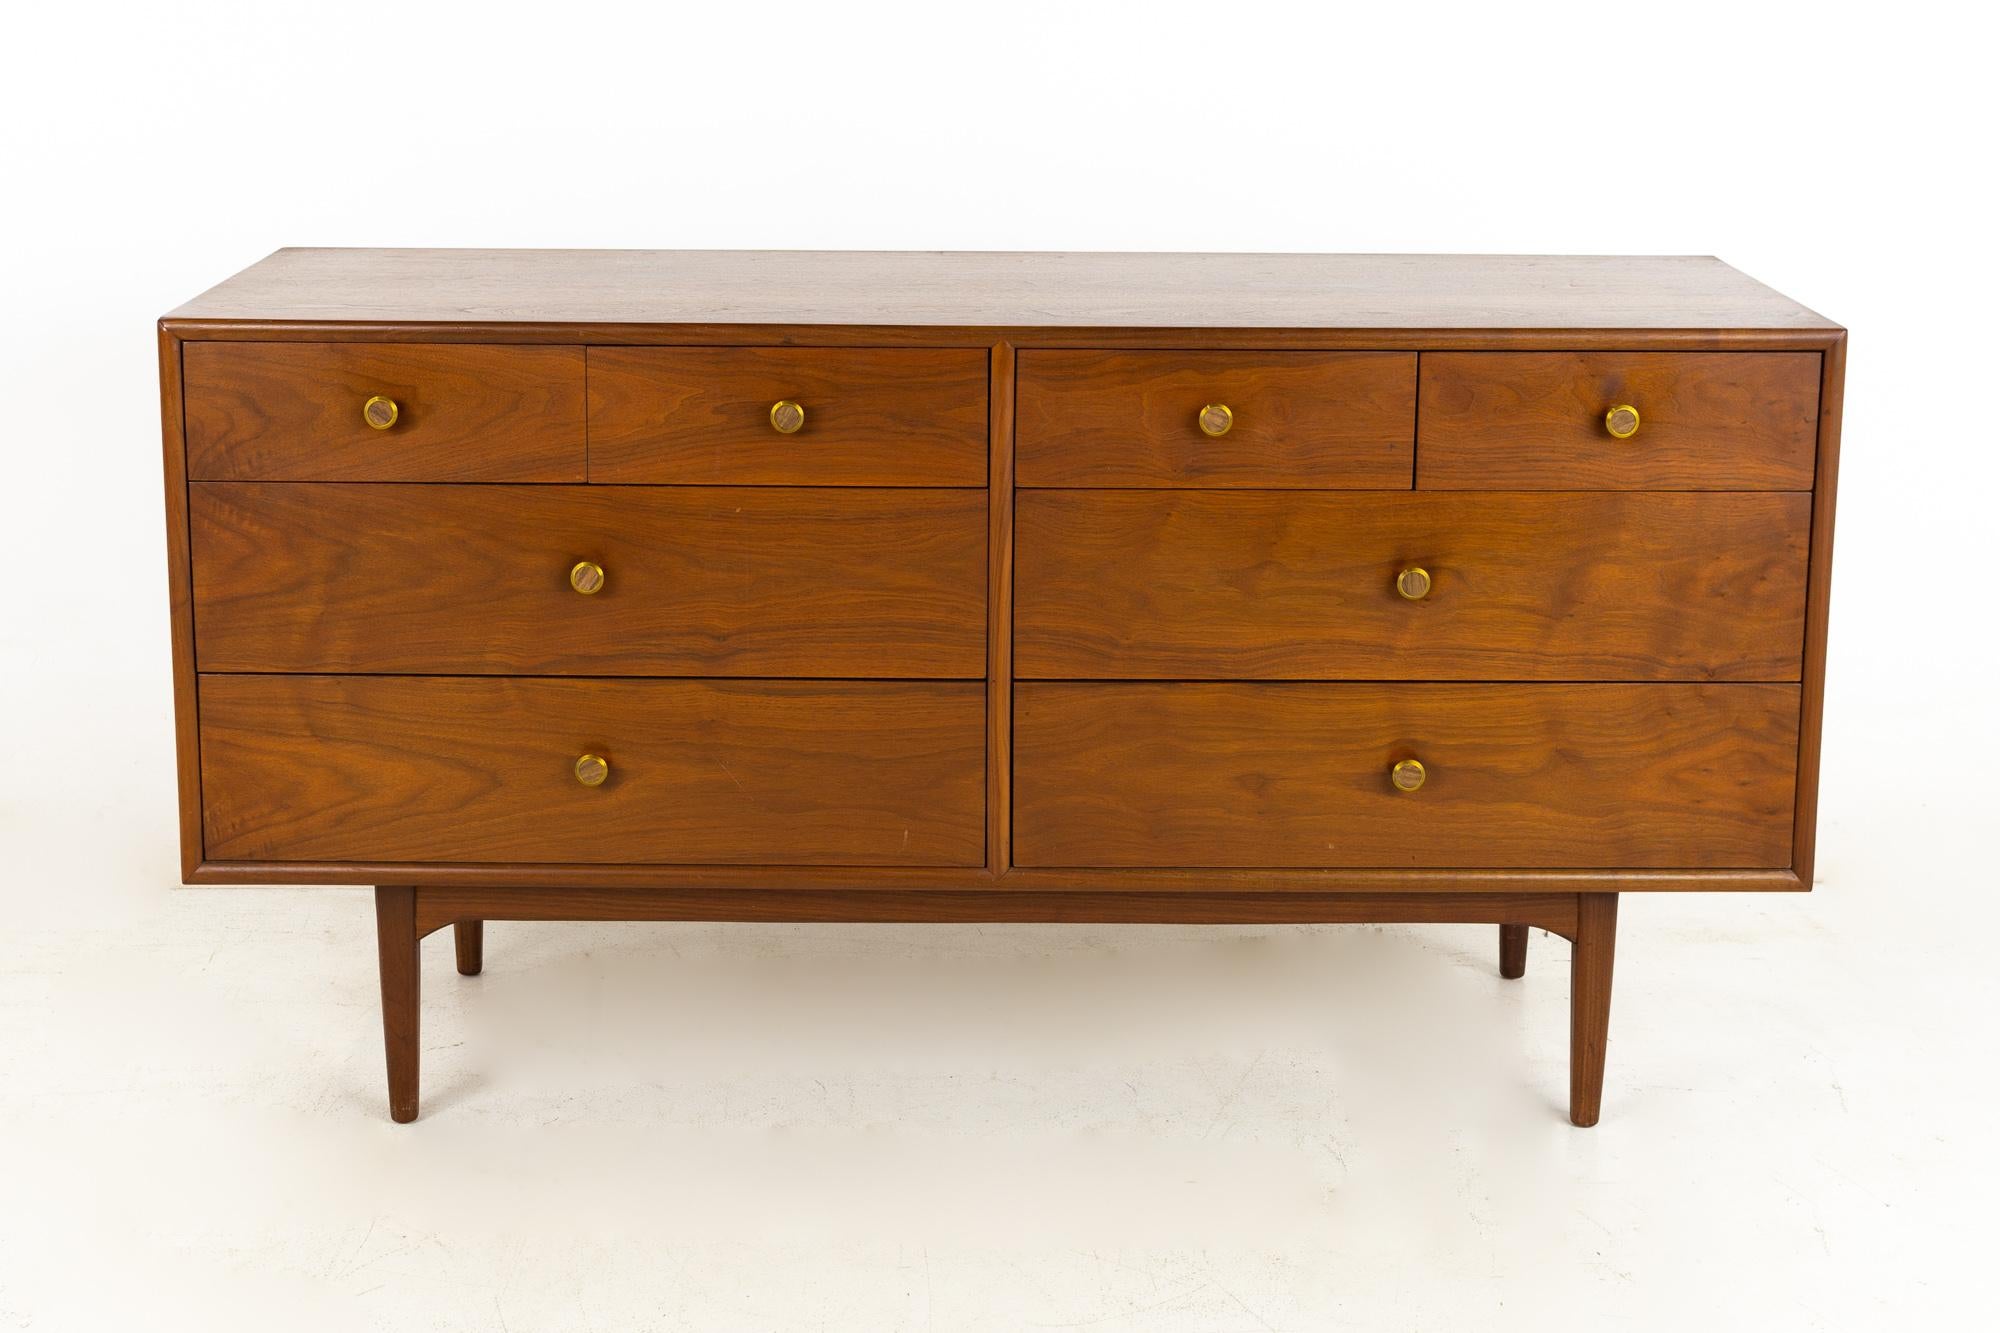 Kipp Stewart for Drexel mid century walnut 8 drawer lowboy dresser

This dresser measures: 62 wide x 29 deep x 31.25 inches high

All pieces of furniture can be had in what we call restored vintage condition. That means the piece is restored